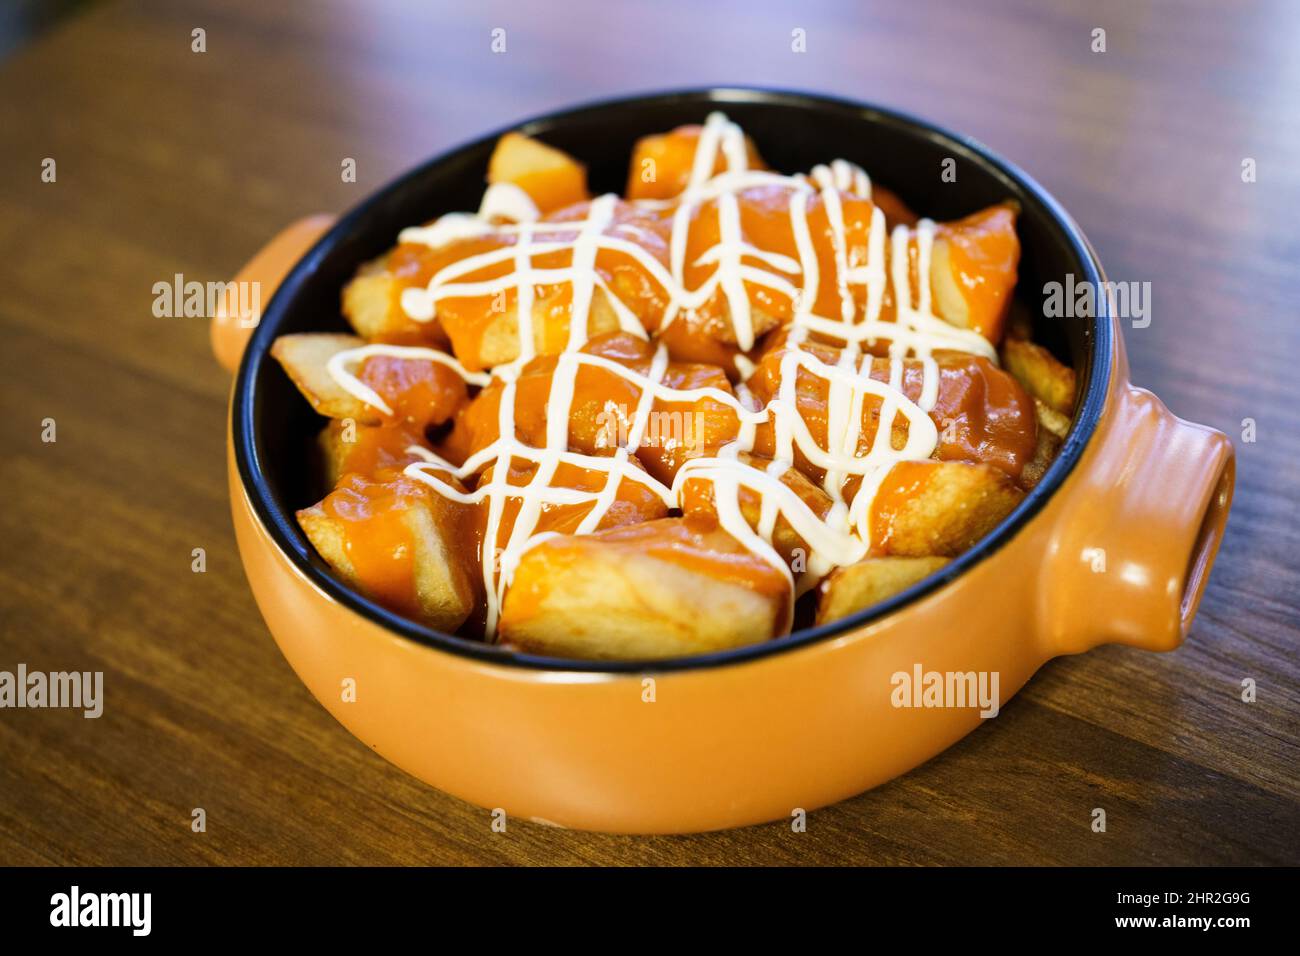 Plate of patatas bravas, a typical Spanish dish, on restaurant table Stock Photo